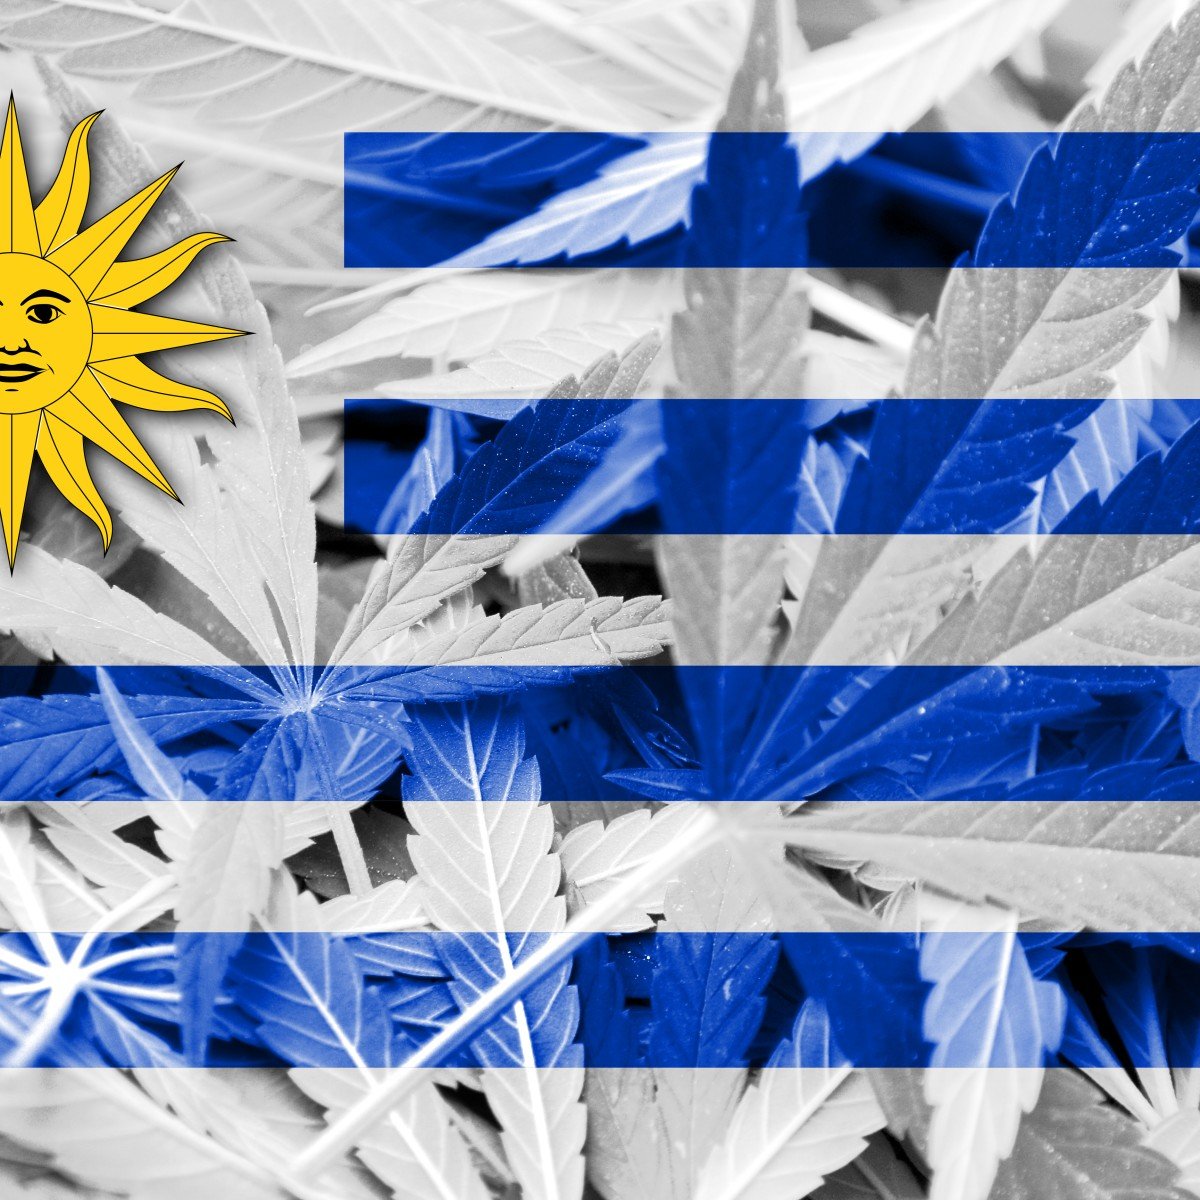 Uruguay legalized weed 6 years ago and experts say it's made the country better than ever